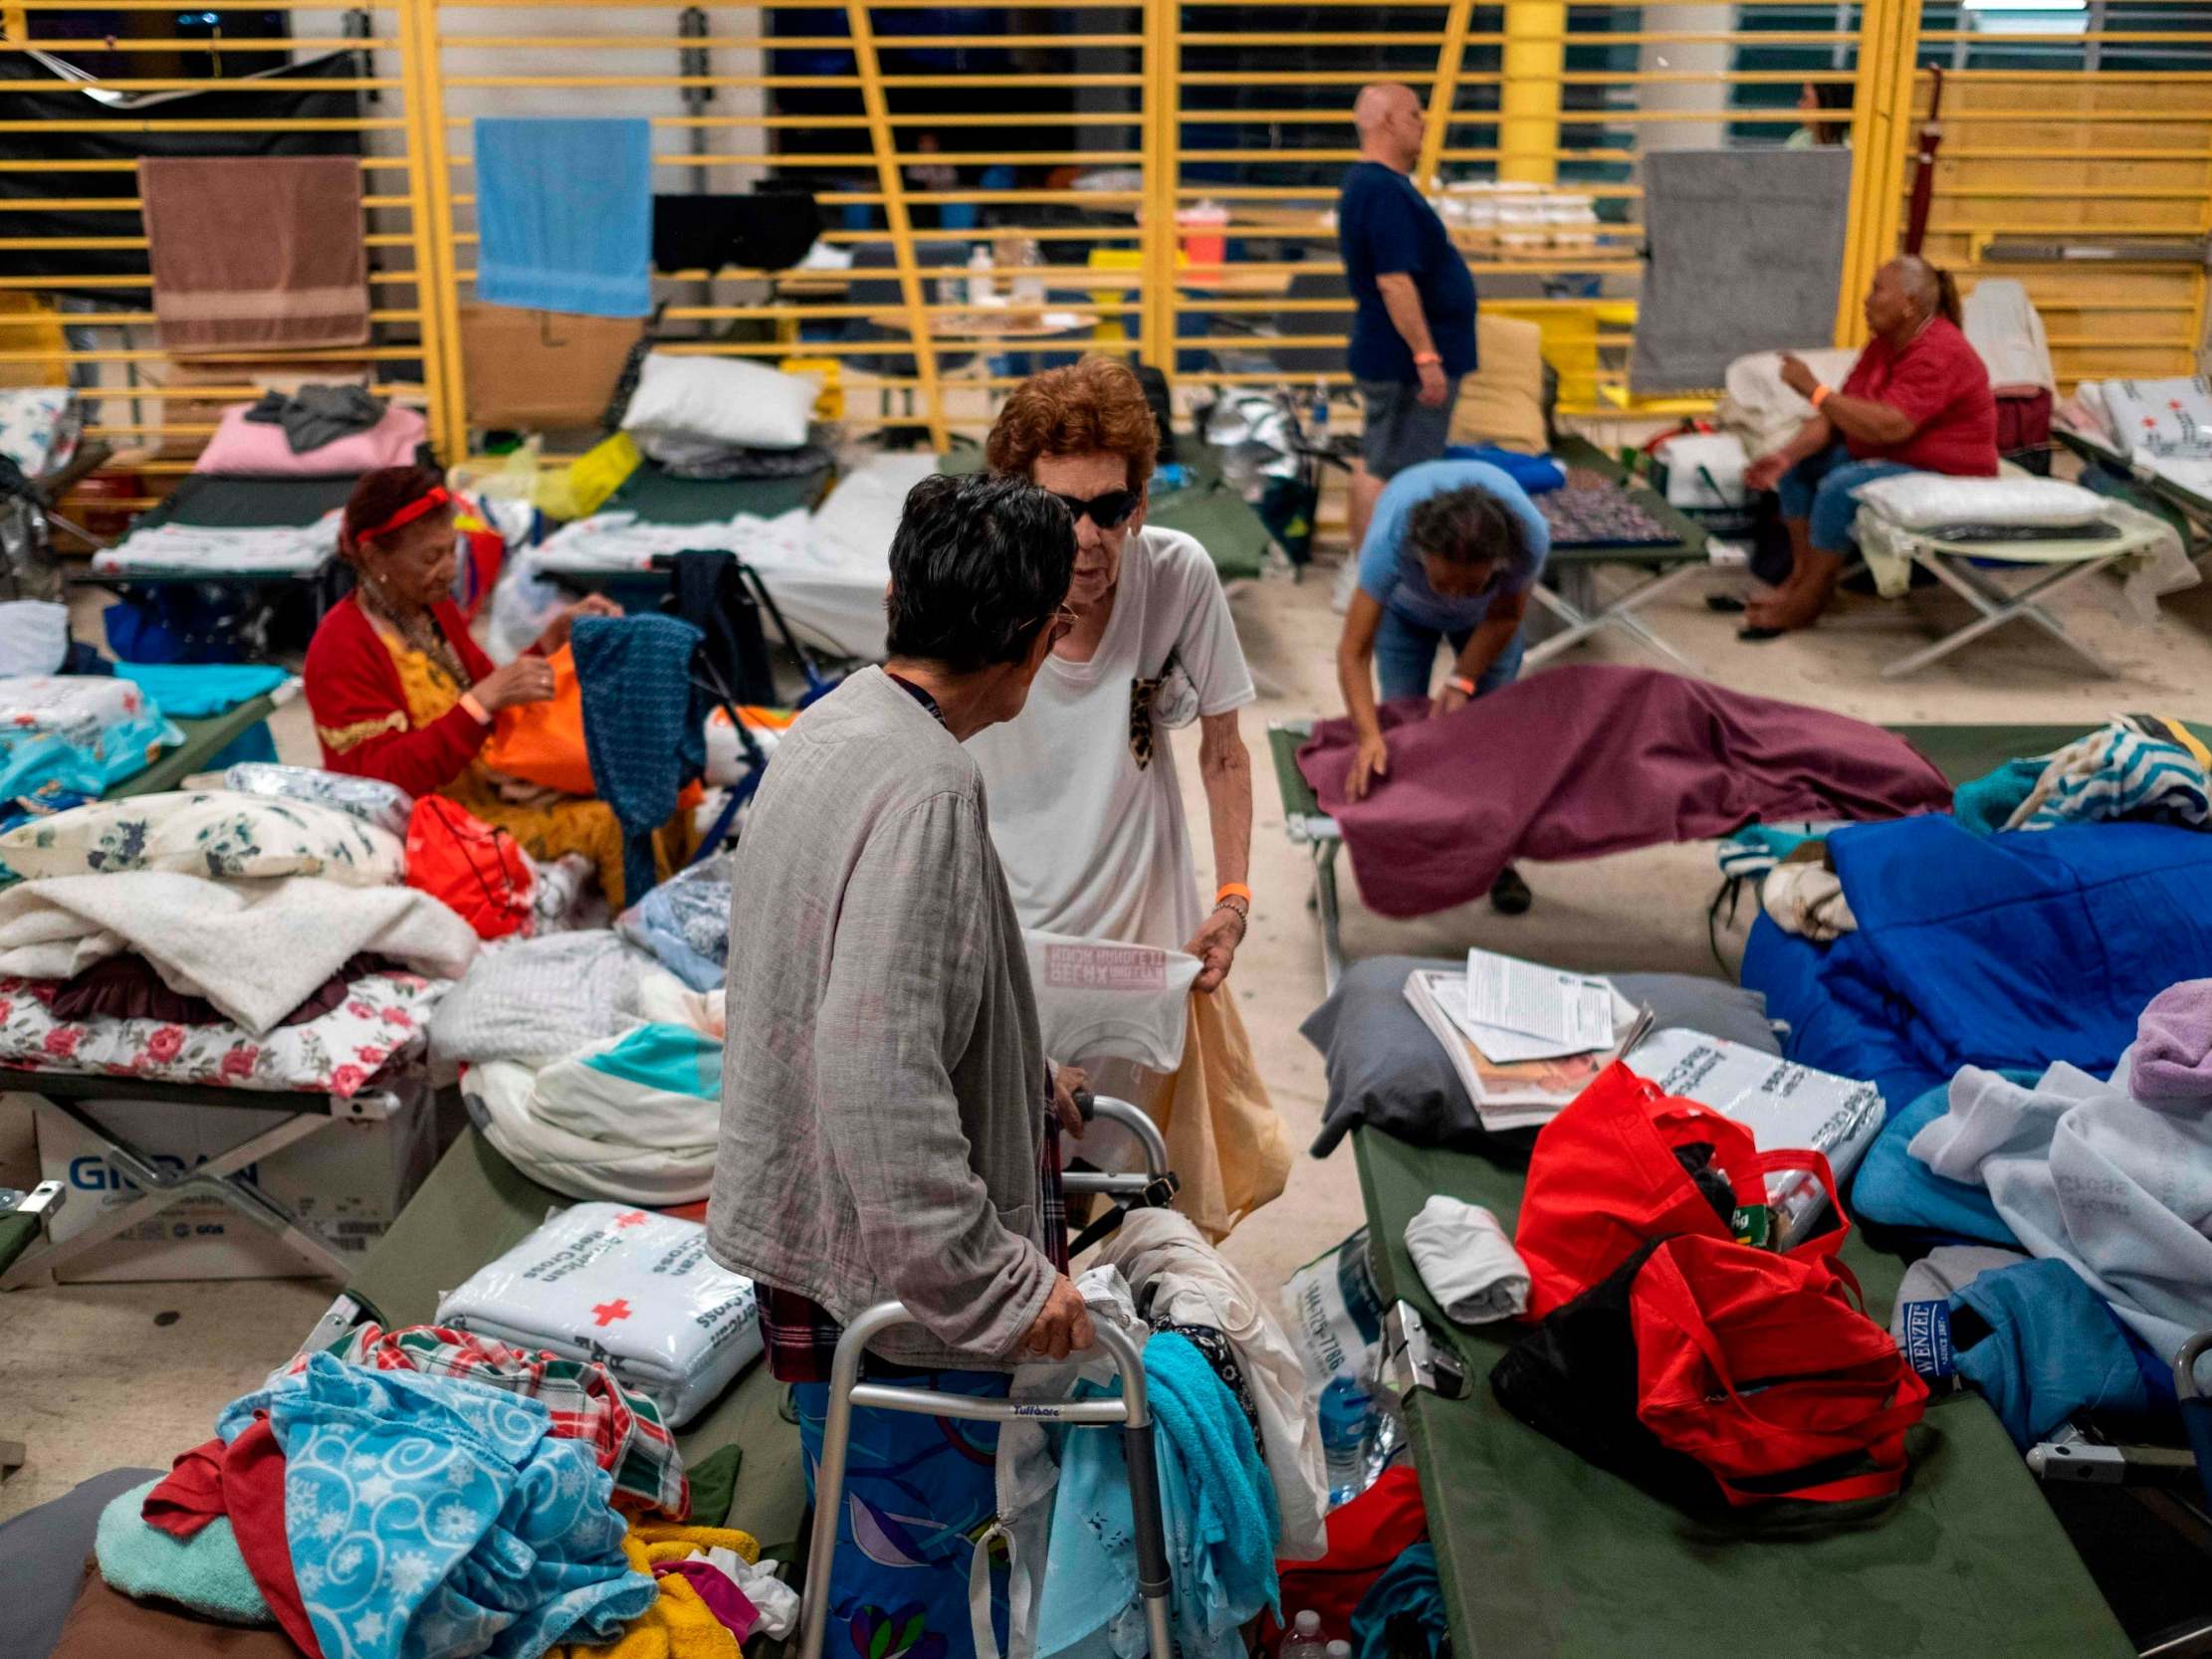 Residents take shelter in Ponce, Puerto Rico, after the powerful earthquakes in January